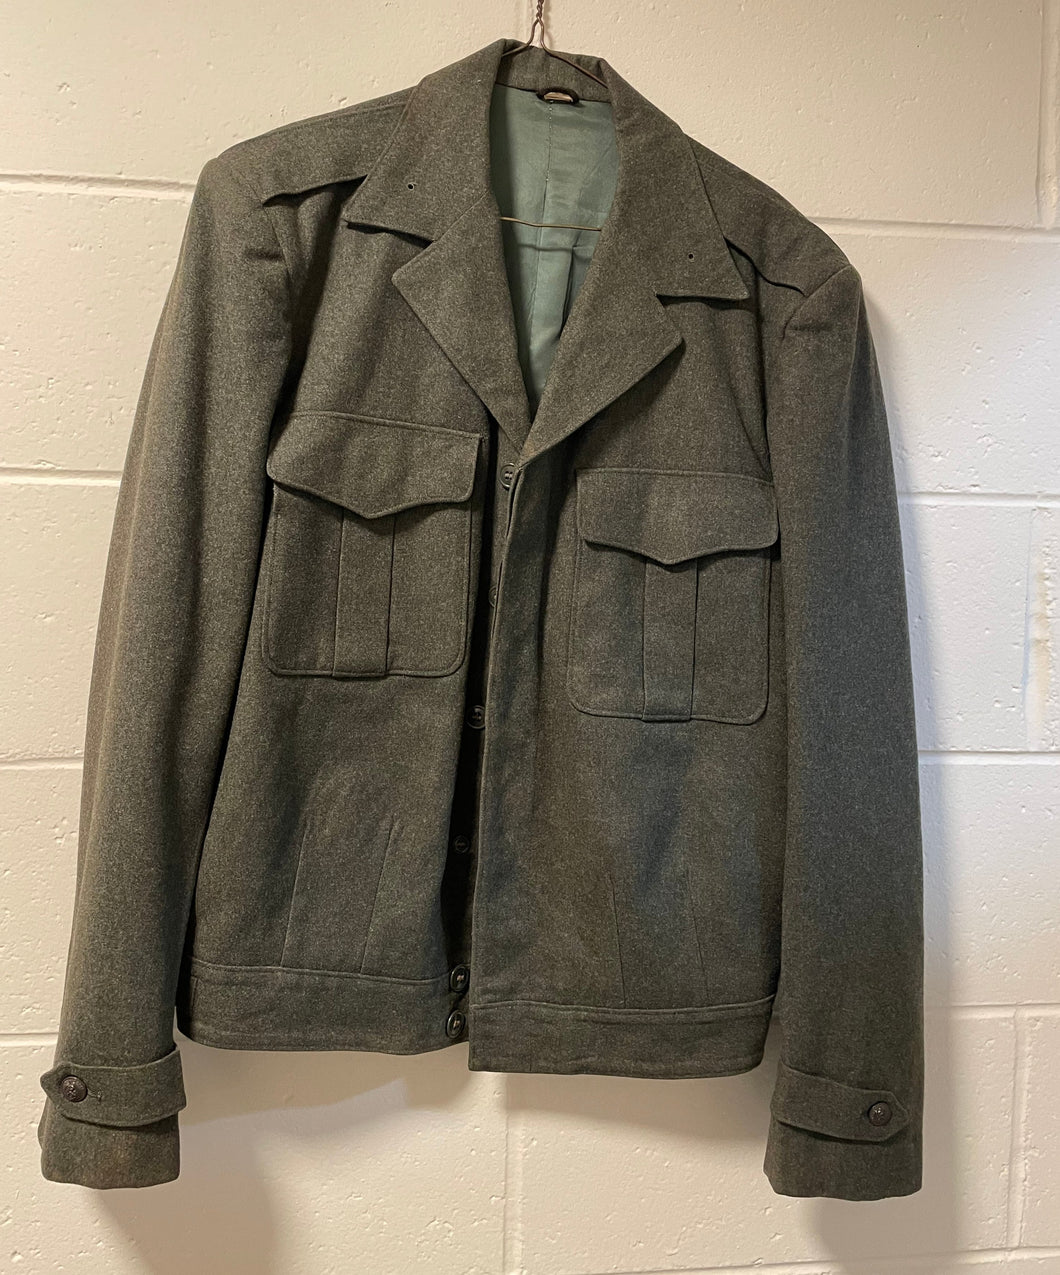 FRONT VIEW OF VINTAGE MARINE CORPS IKE JACKET